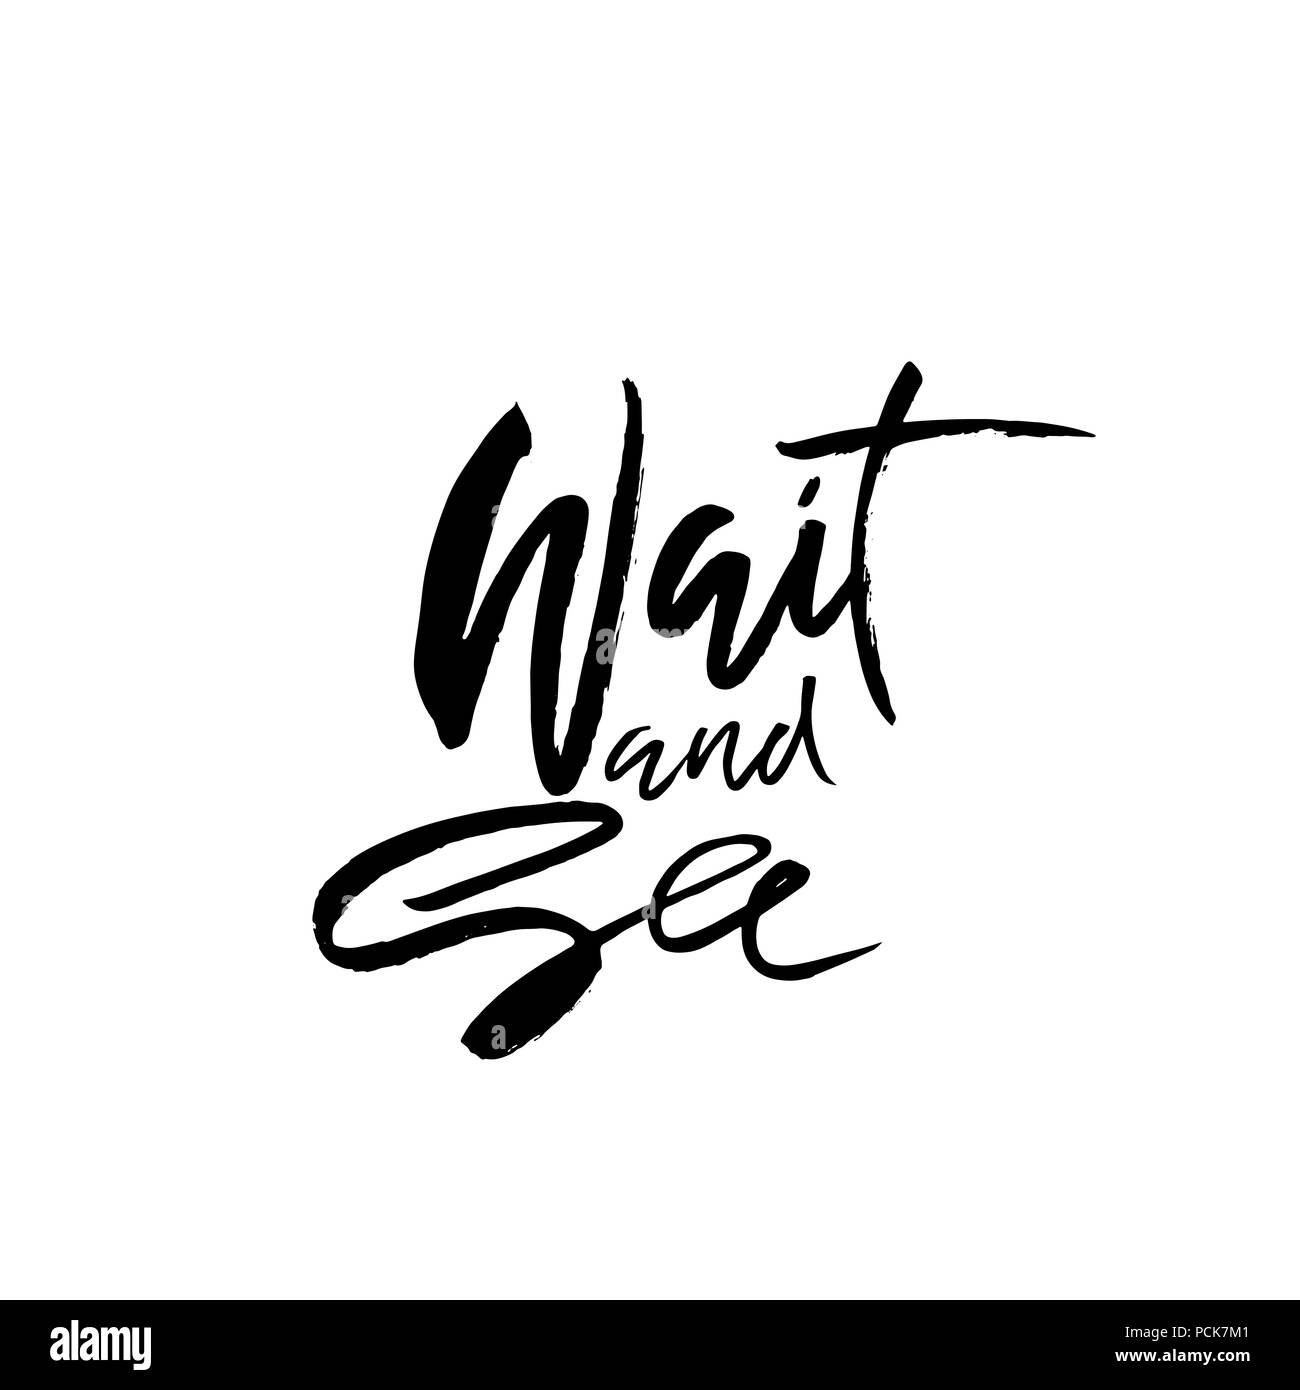 Wait and see. Hand drawn dry brush lettering. Ink illustration. Modern calligraphy phrase. Vector illustration. Stock Vector